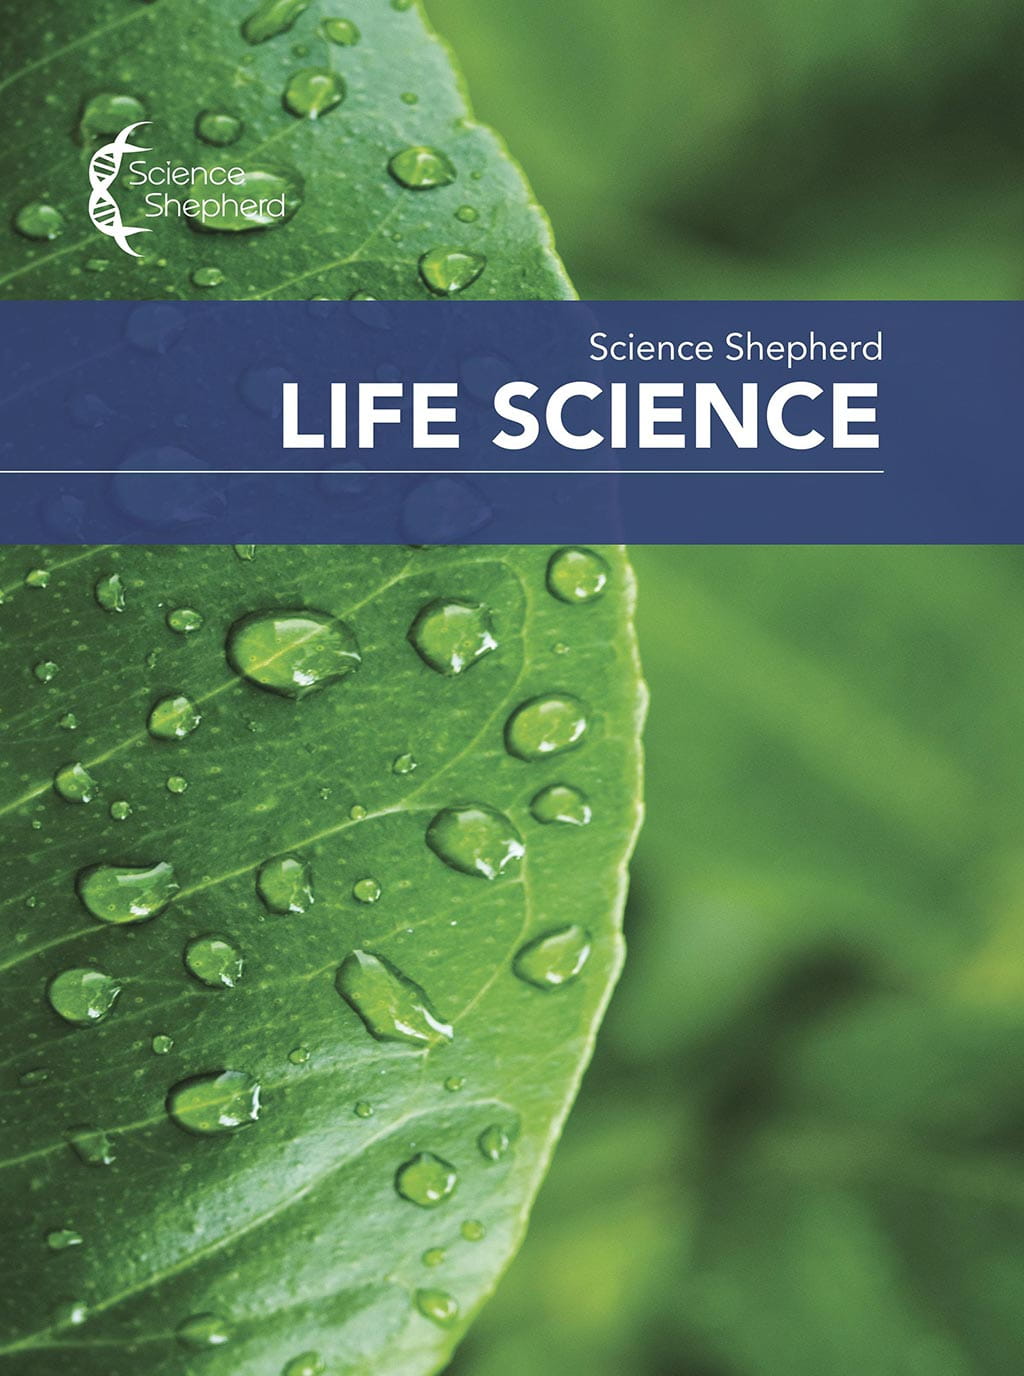 Discounted homeschool curriculum Life Science textbook cover of a leaf with water drops